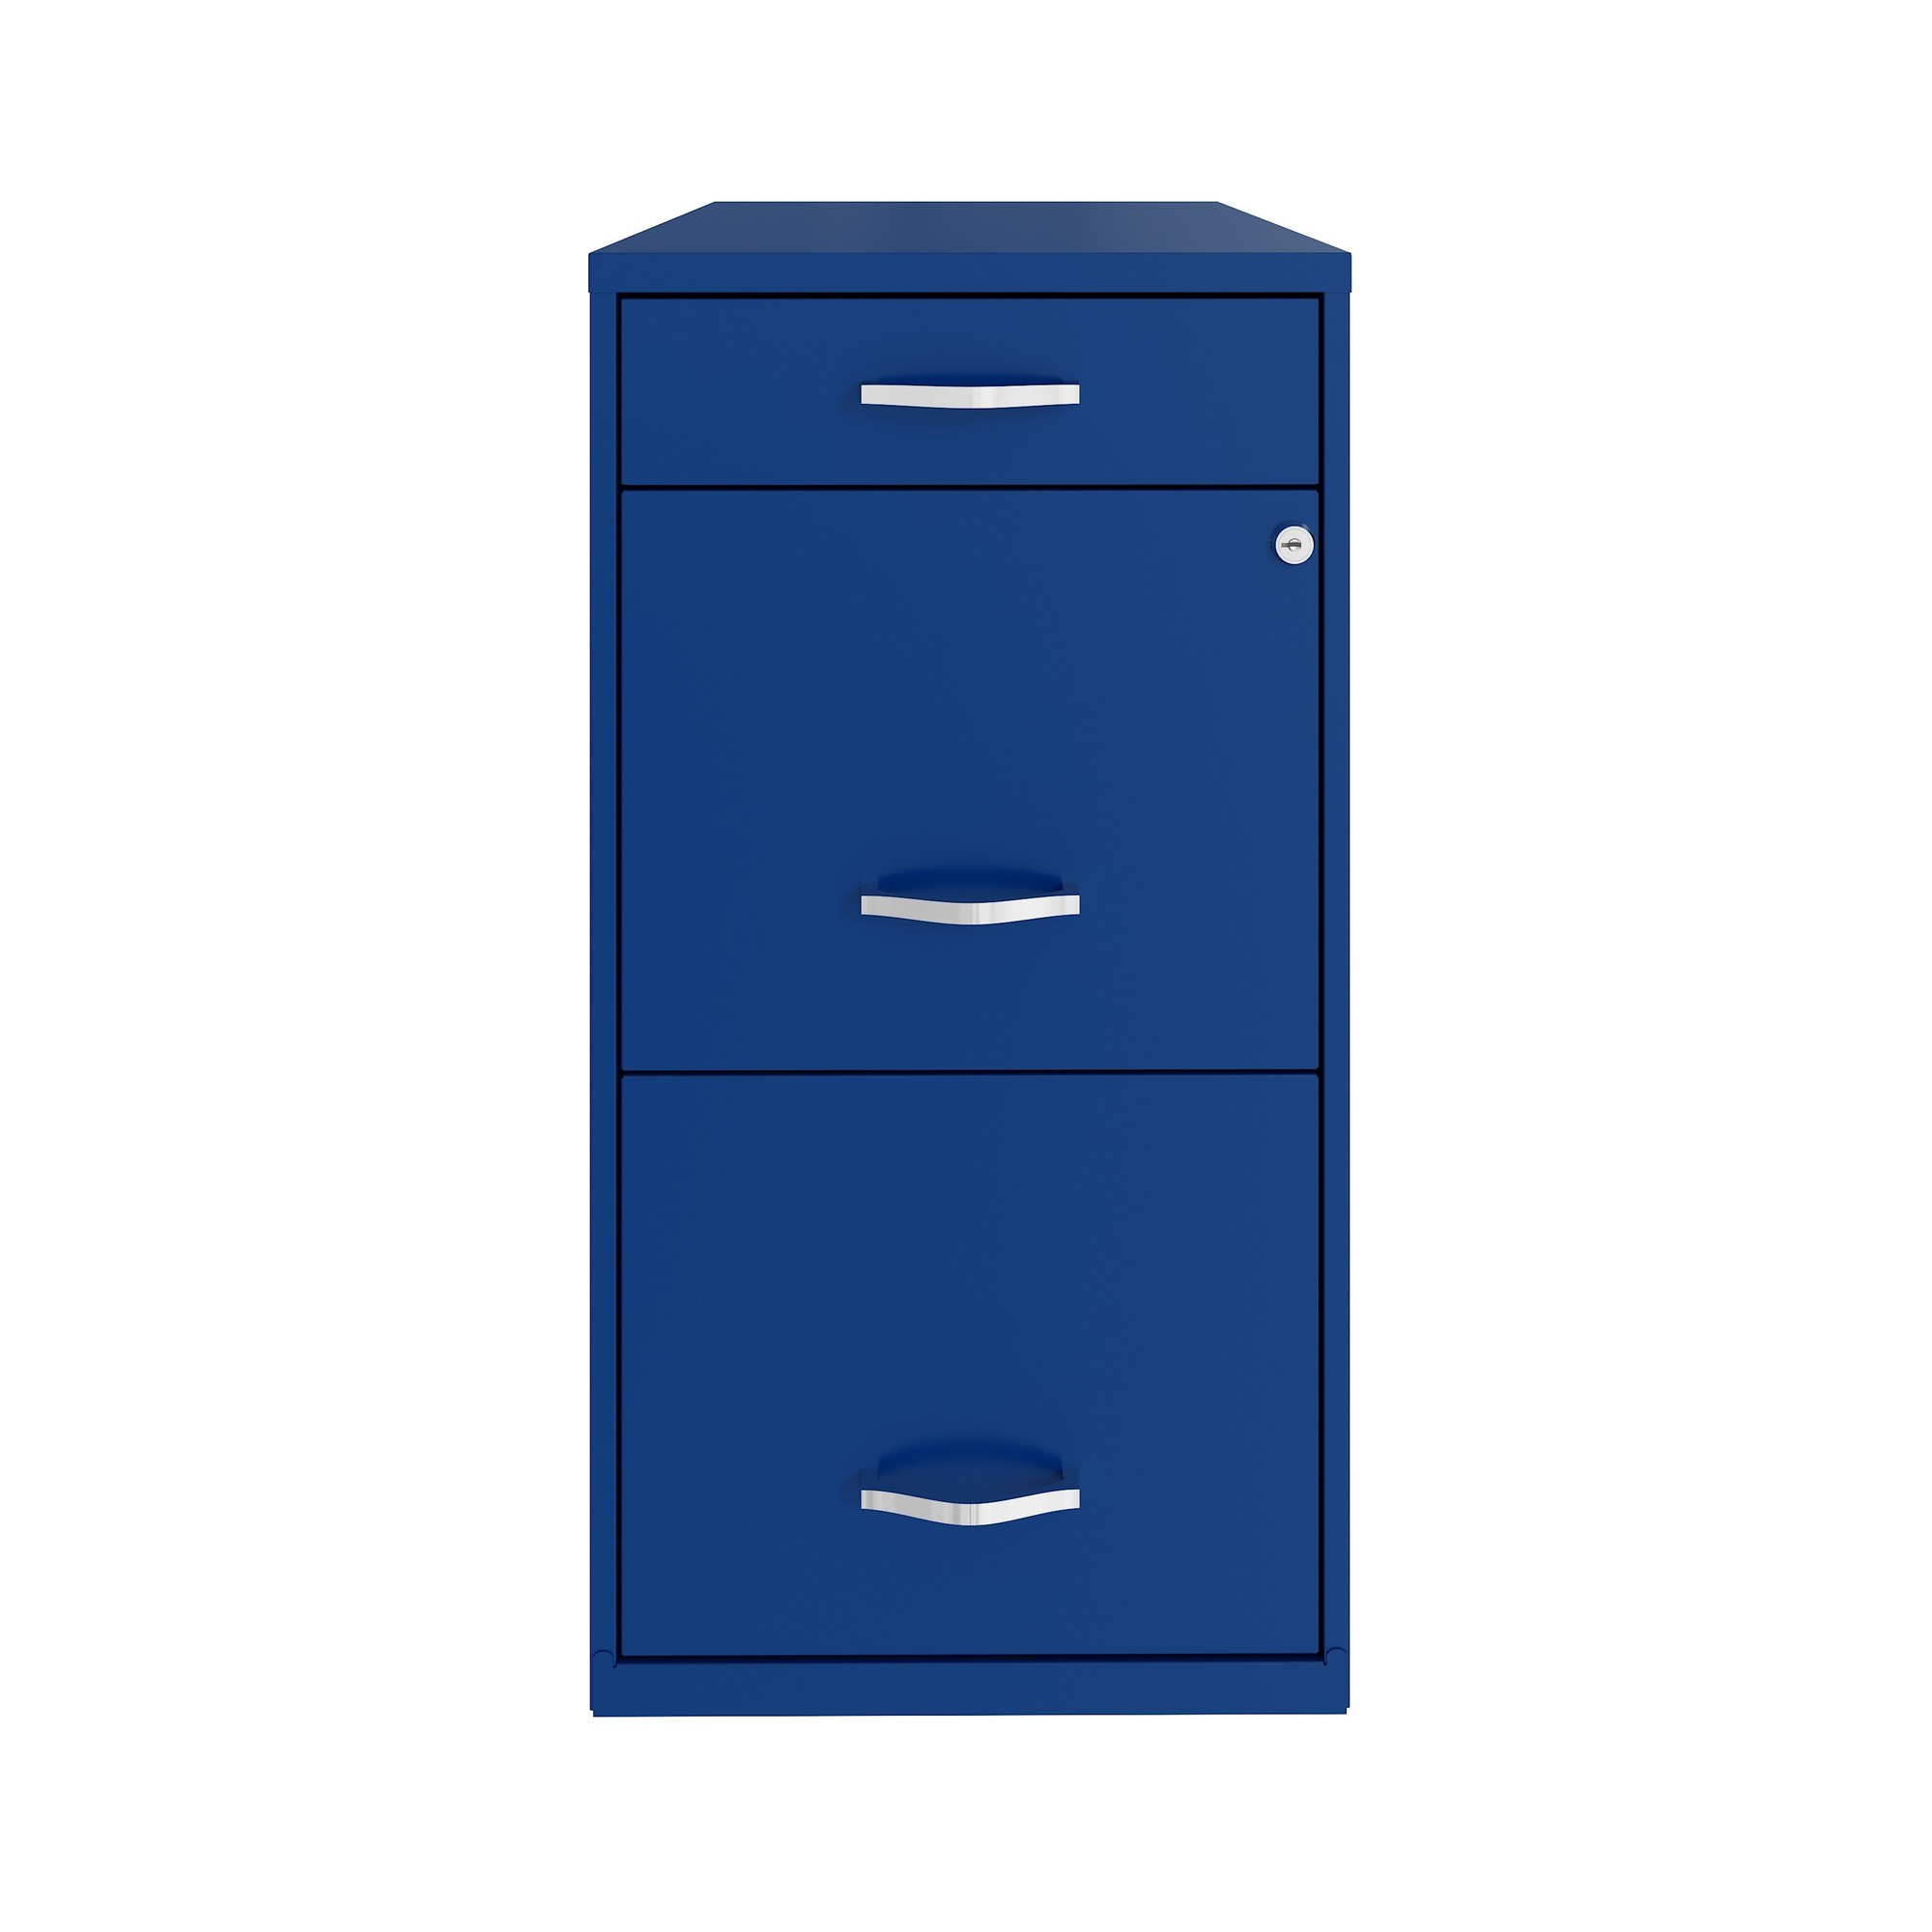 Hirsh Industries, 3 Drawer Letter Width File Cabinet, Pencil Drawer, Width 14.25 in, Depth 18 in, Height 27.32 in, Model 24416